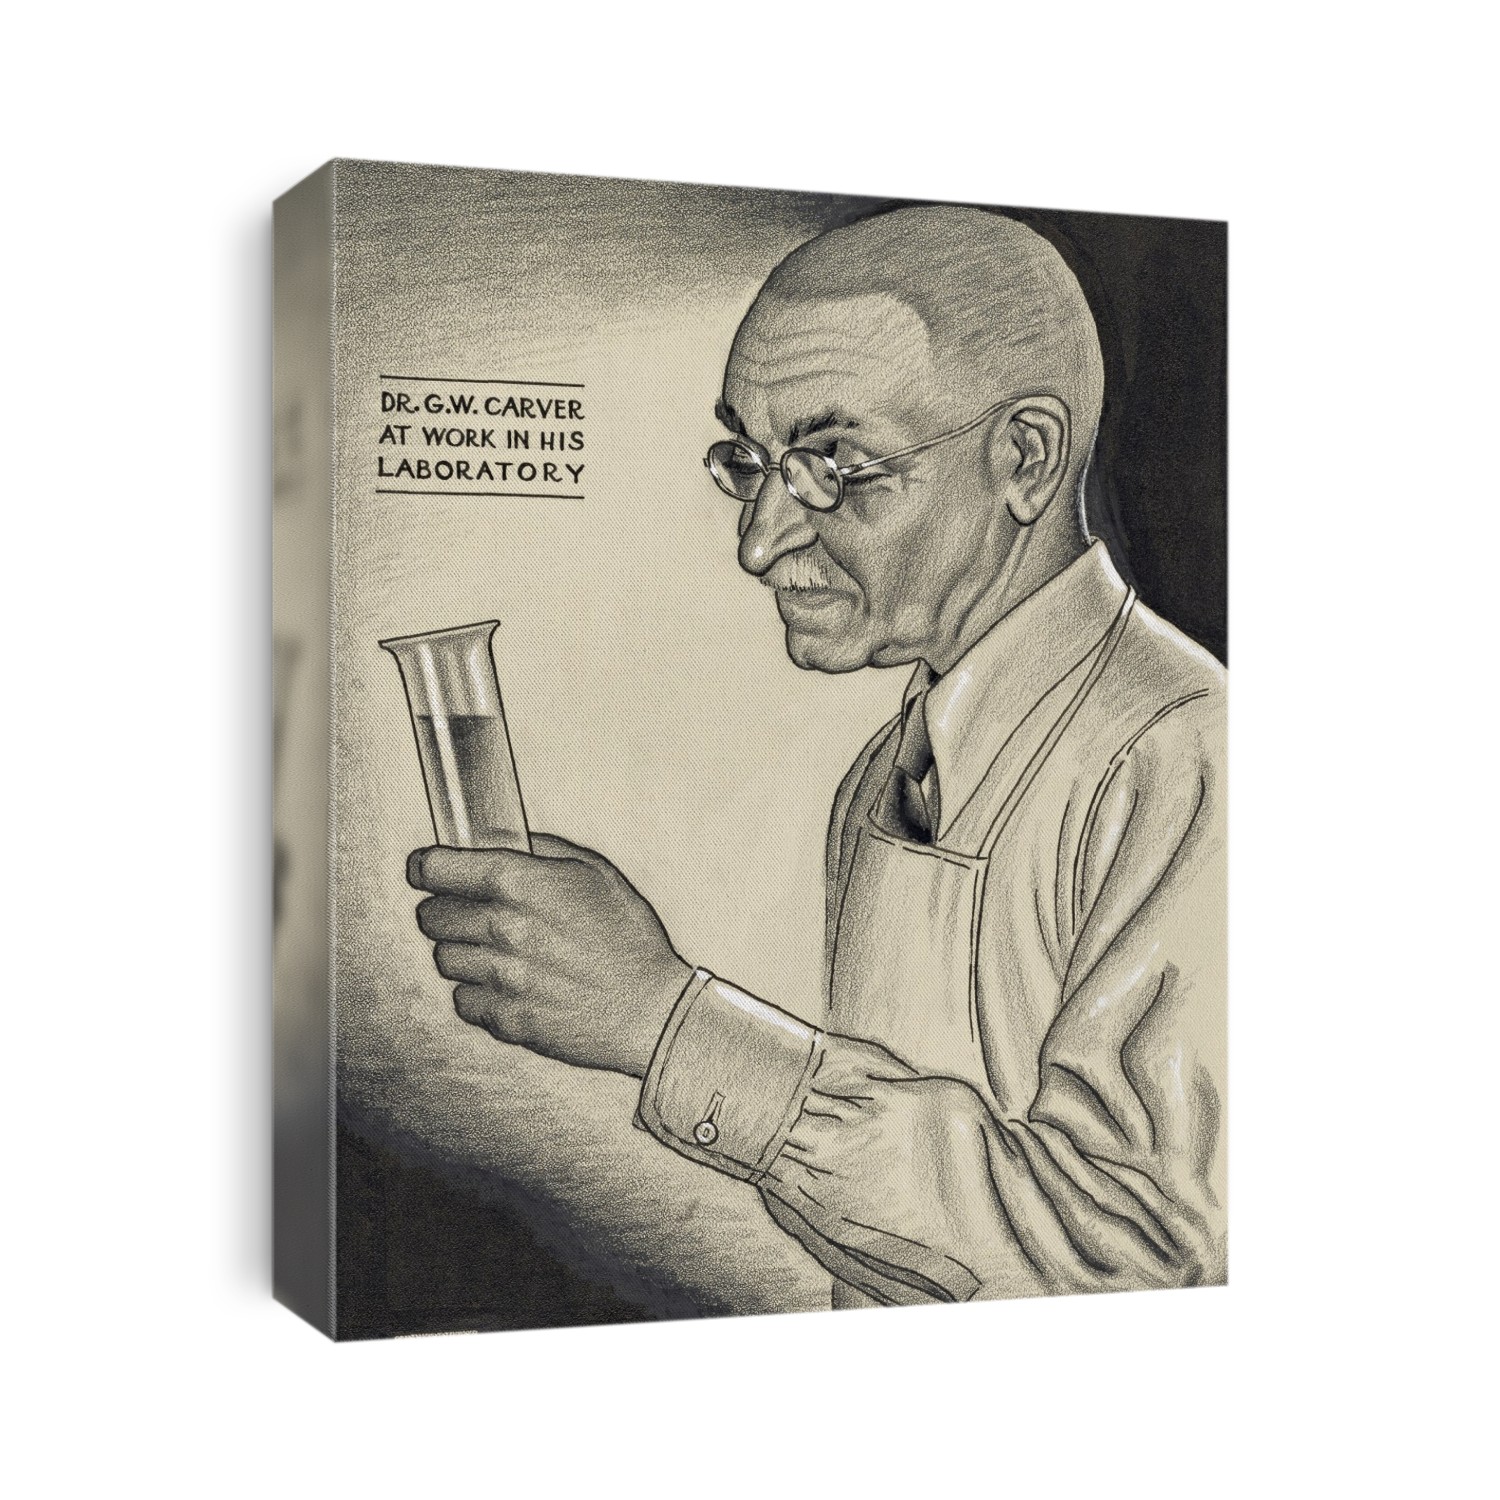 George Washington Carver, born during 1860's, died 1943. American botanist and inventor. After an illustration by Richard Brent.